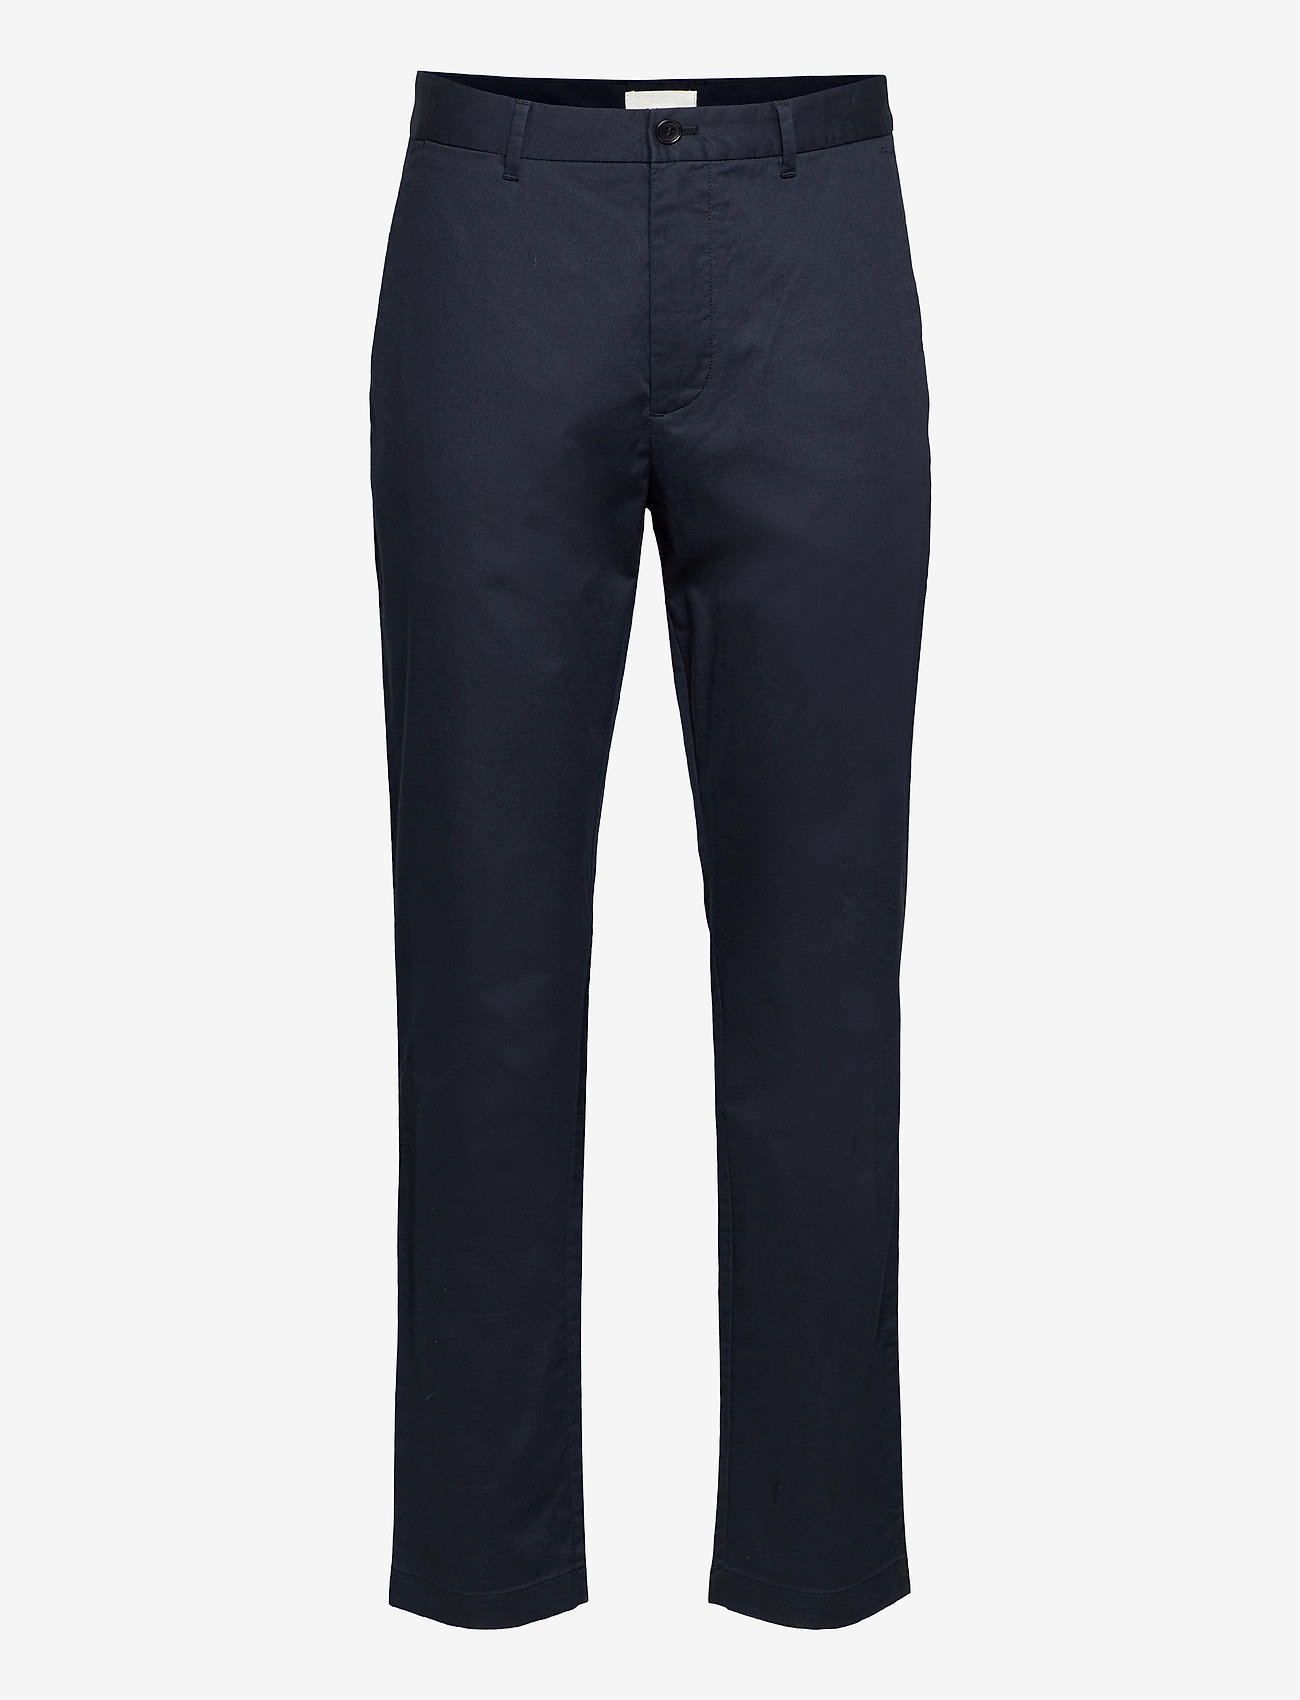 Wood Wood - Marcus light twill trousers - chinosy - navy - 0